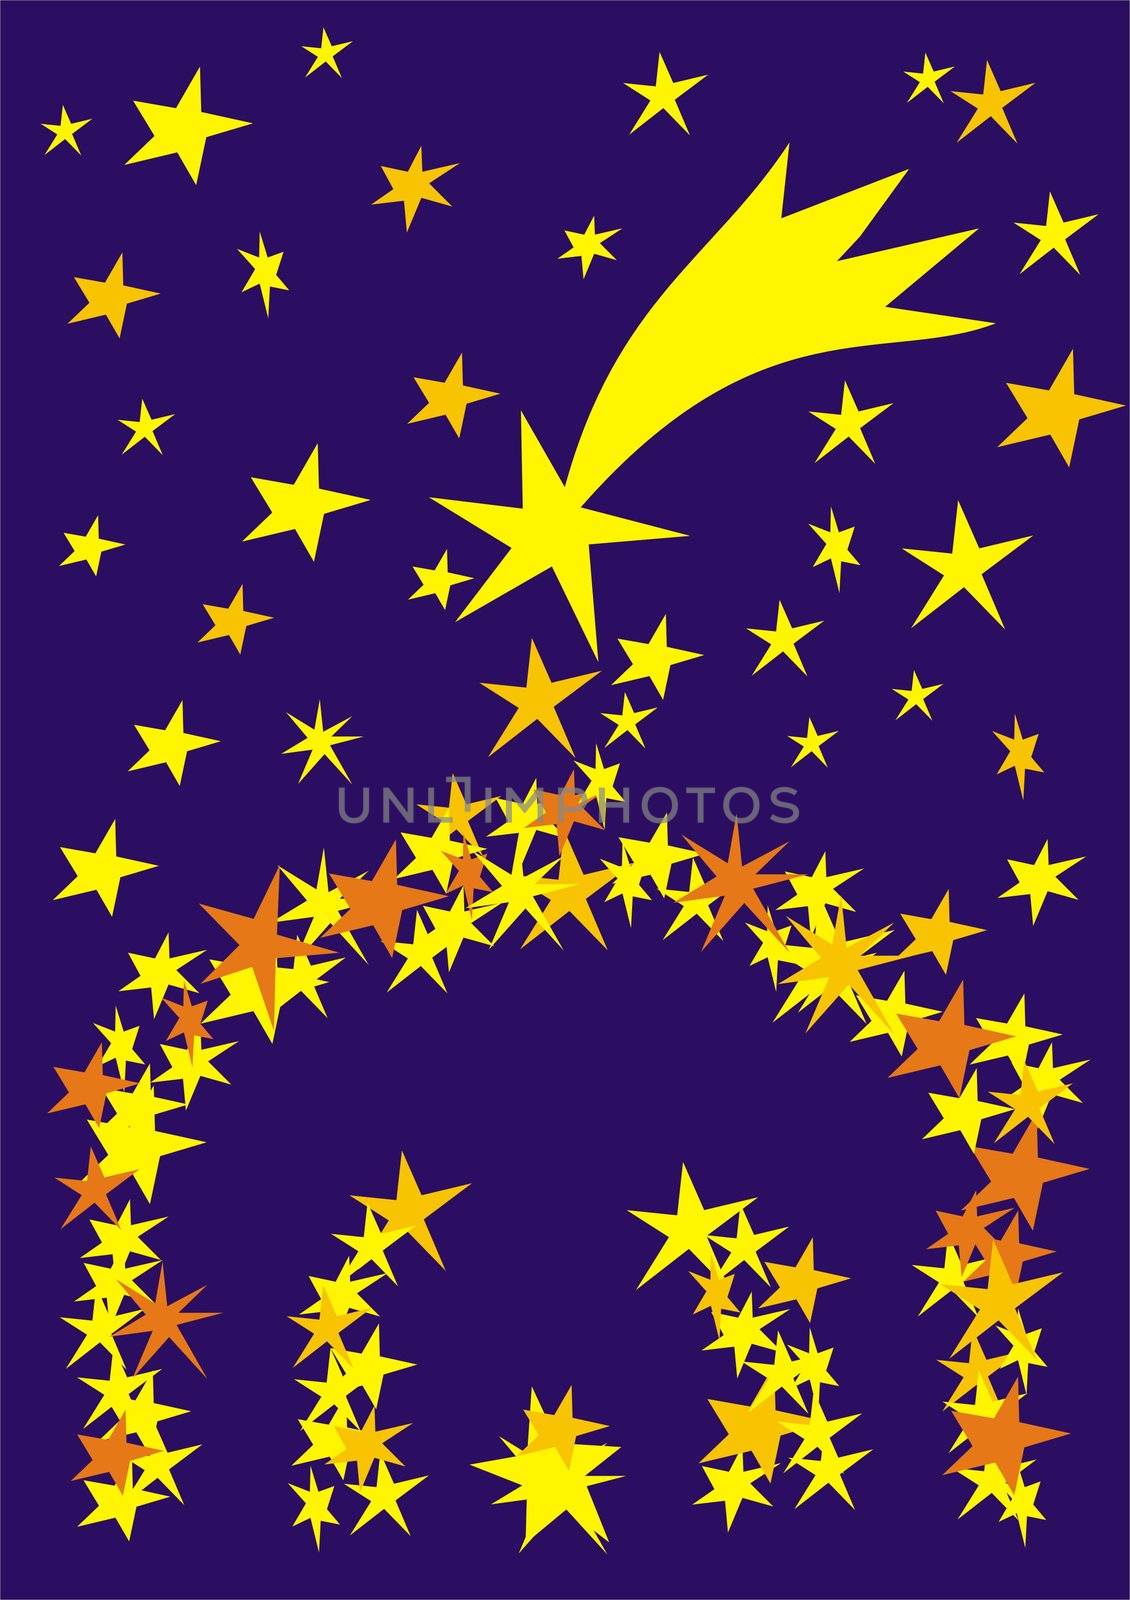 manger made of stars with blue background